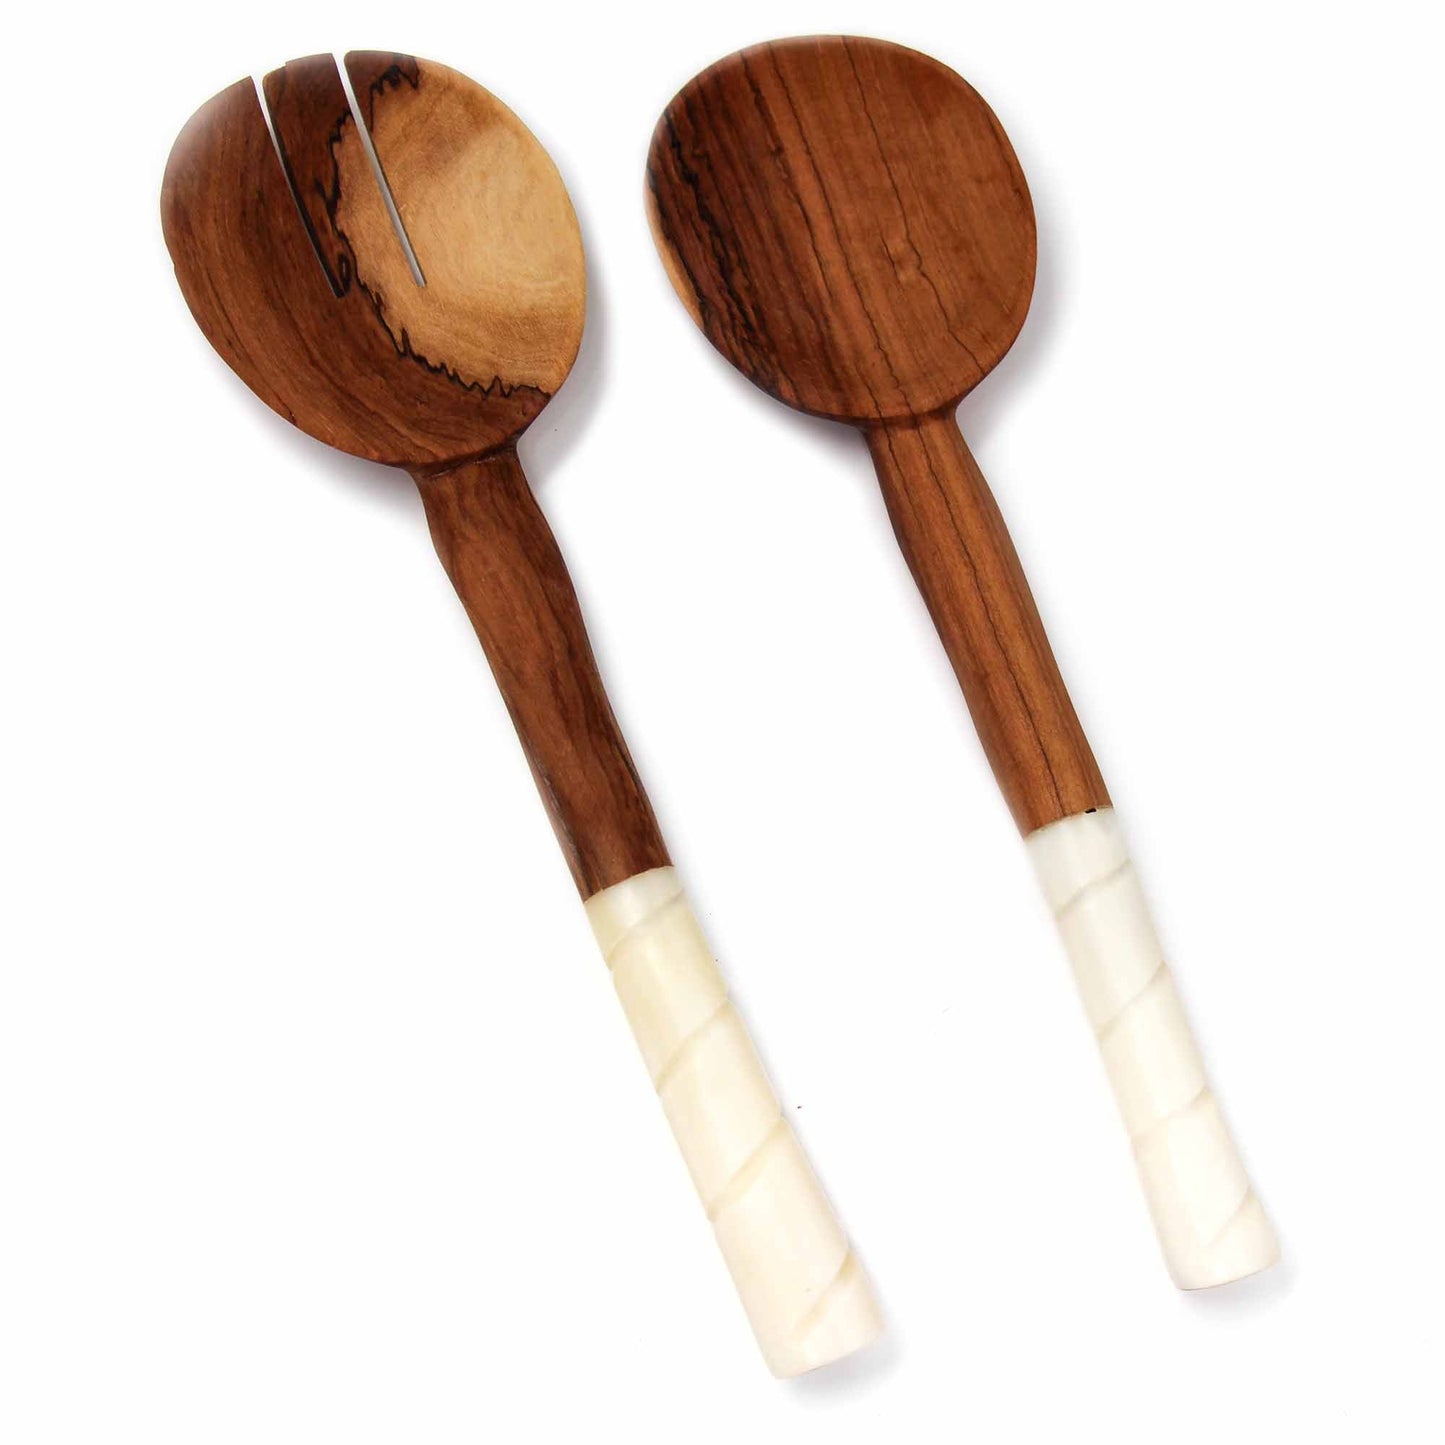 olive-wood-salad-servers-with-bone-handles-white-with-etching-design